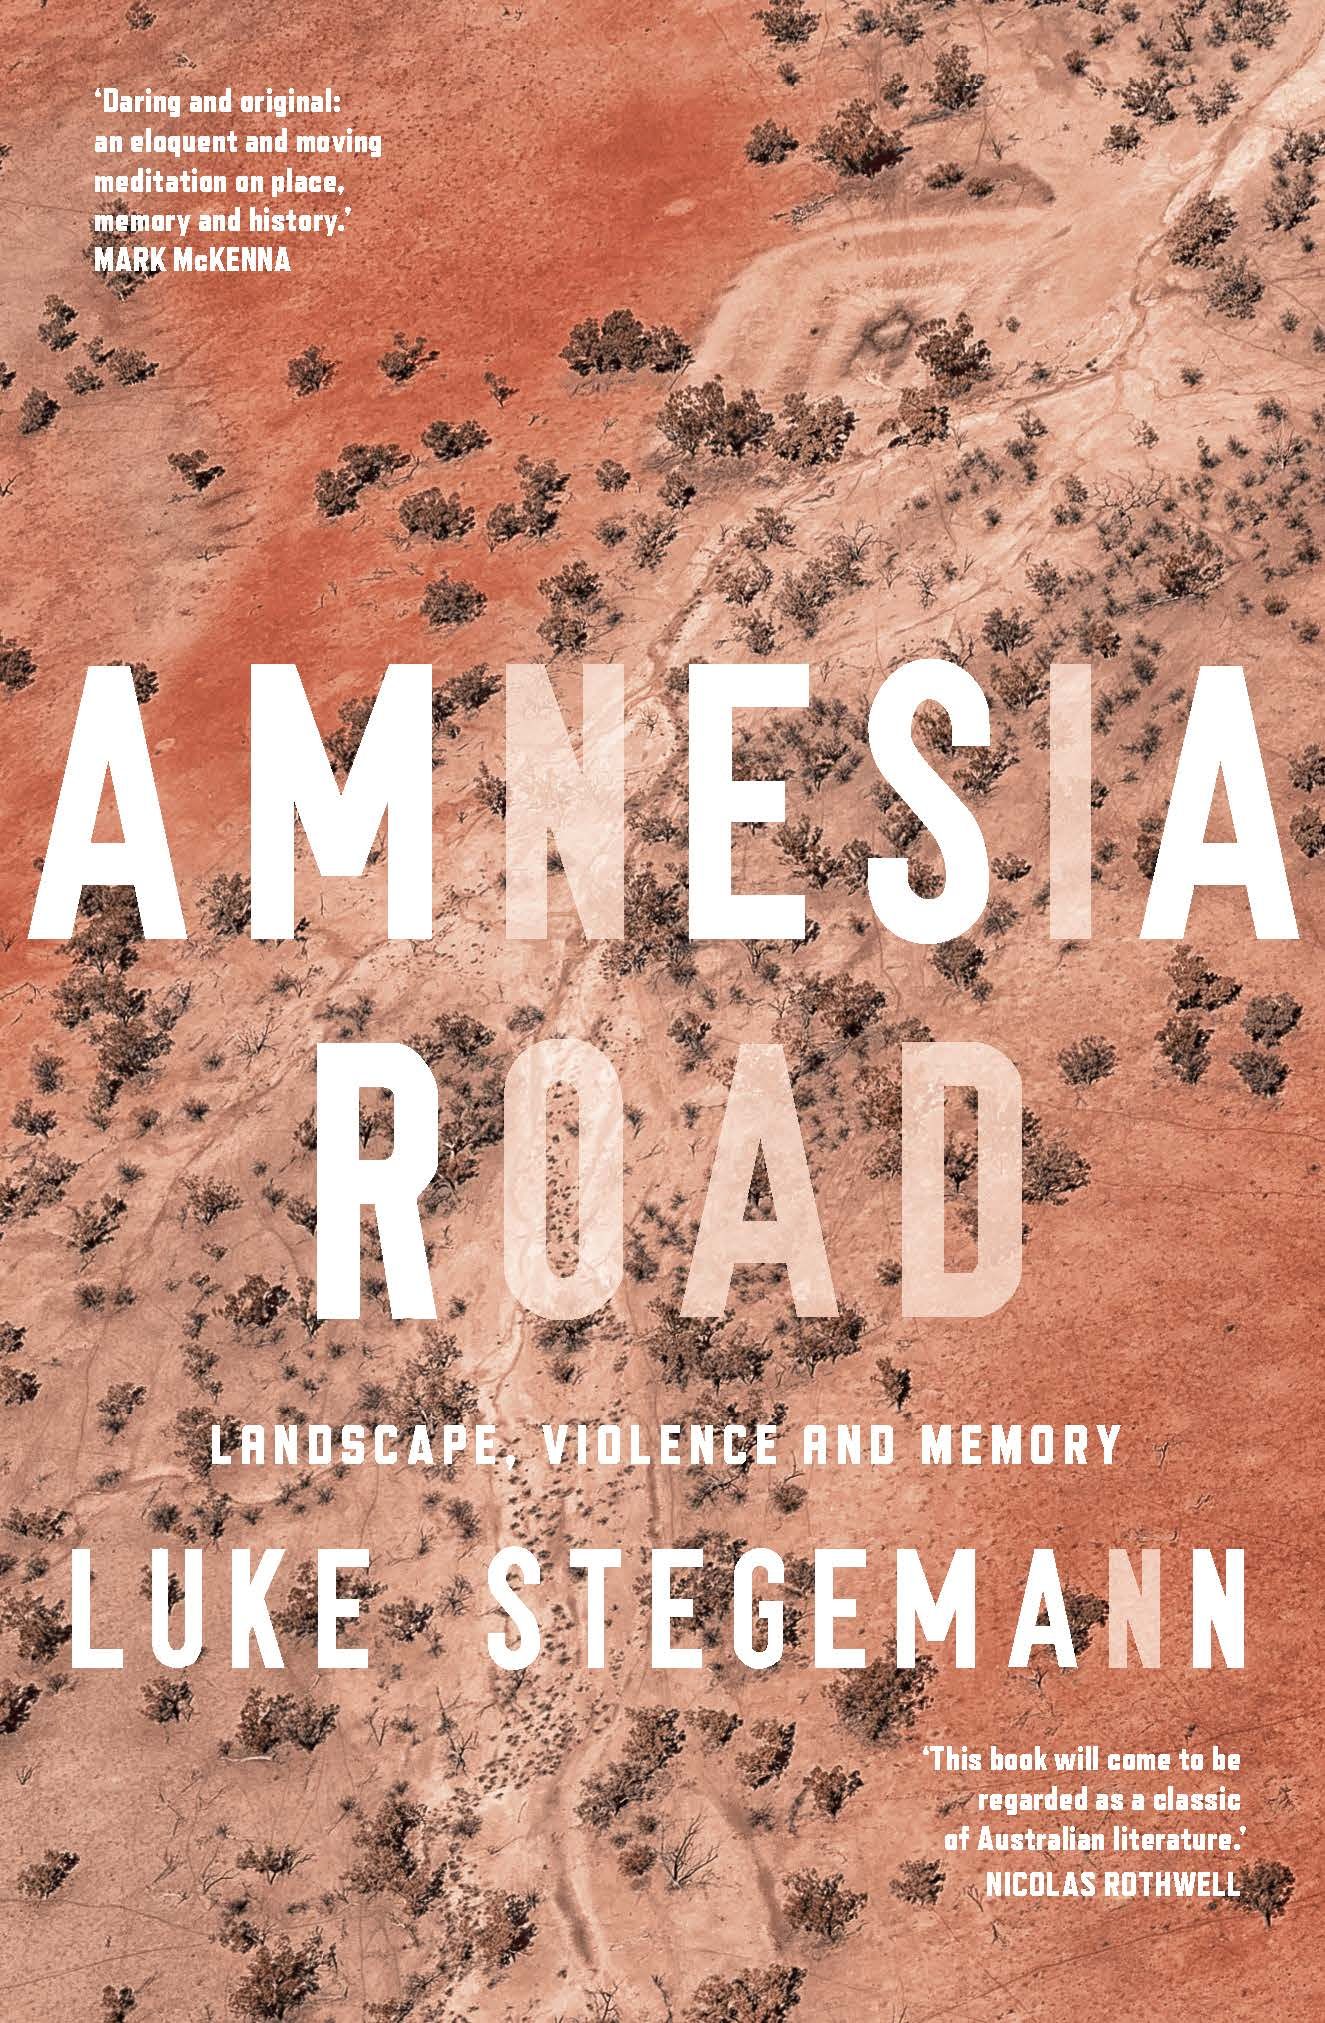 The cover of Amnesia Road by Luke Stegemann - An aerial view of red and brown dirt, with creek beds and some trees